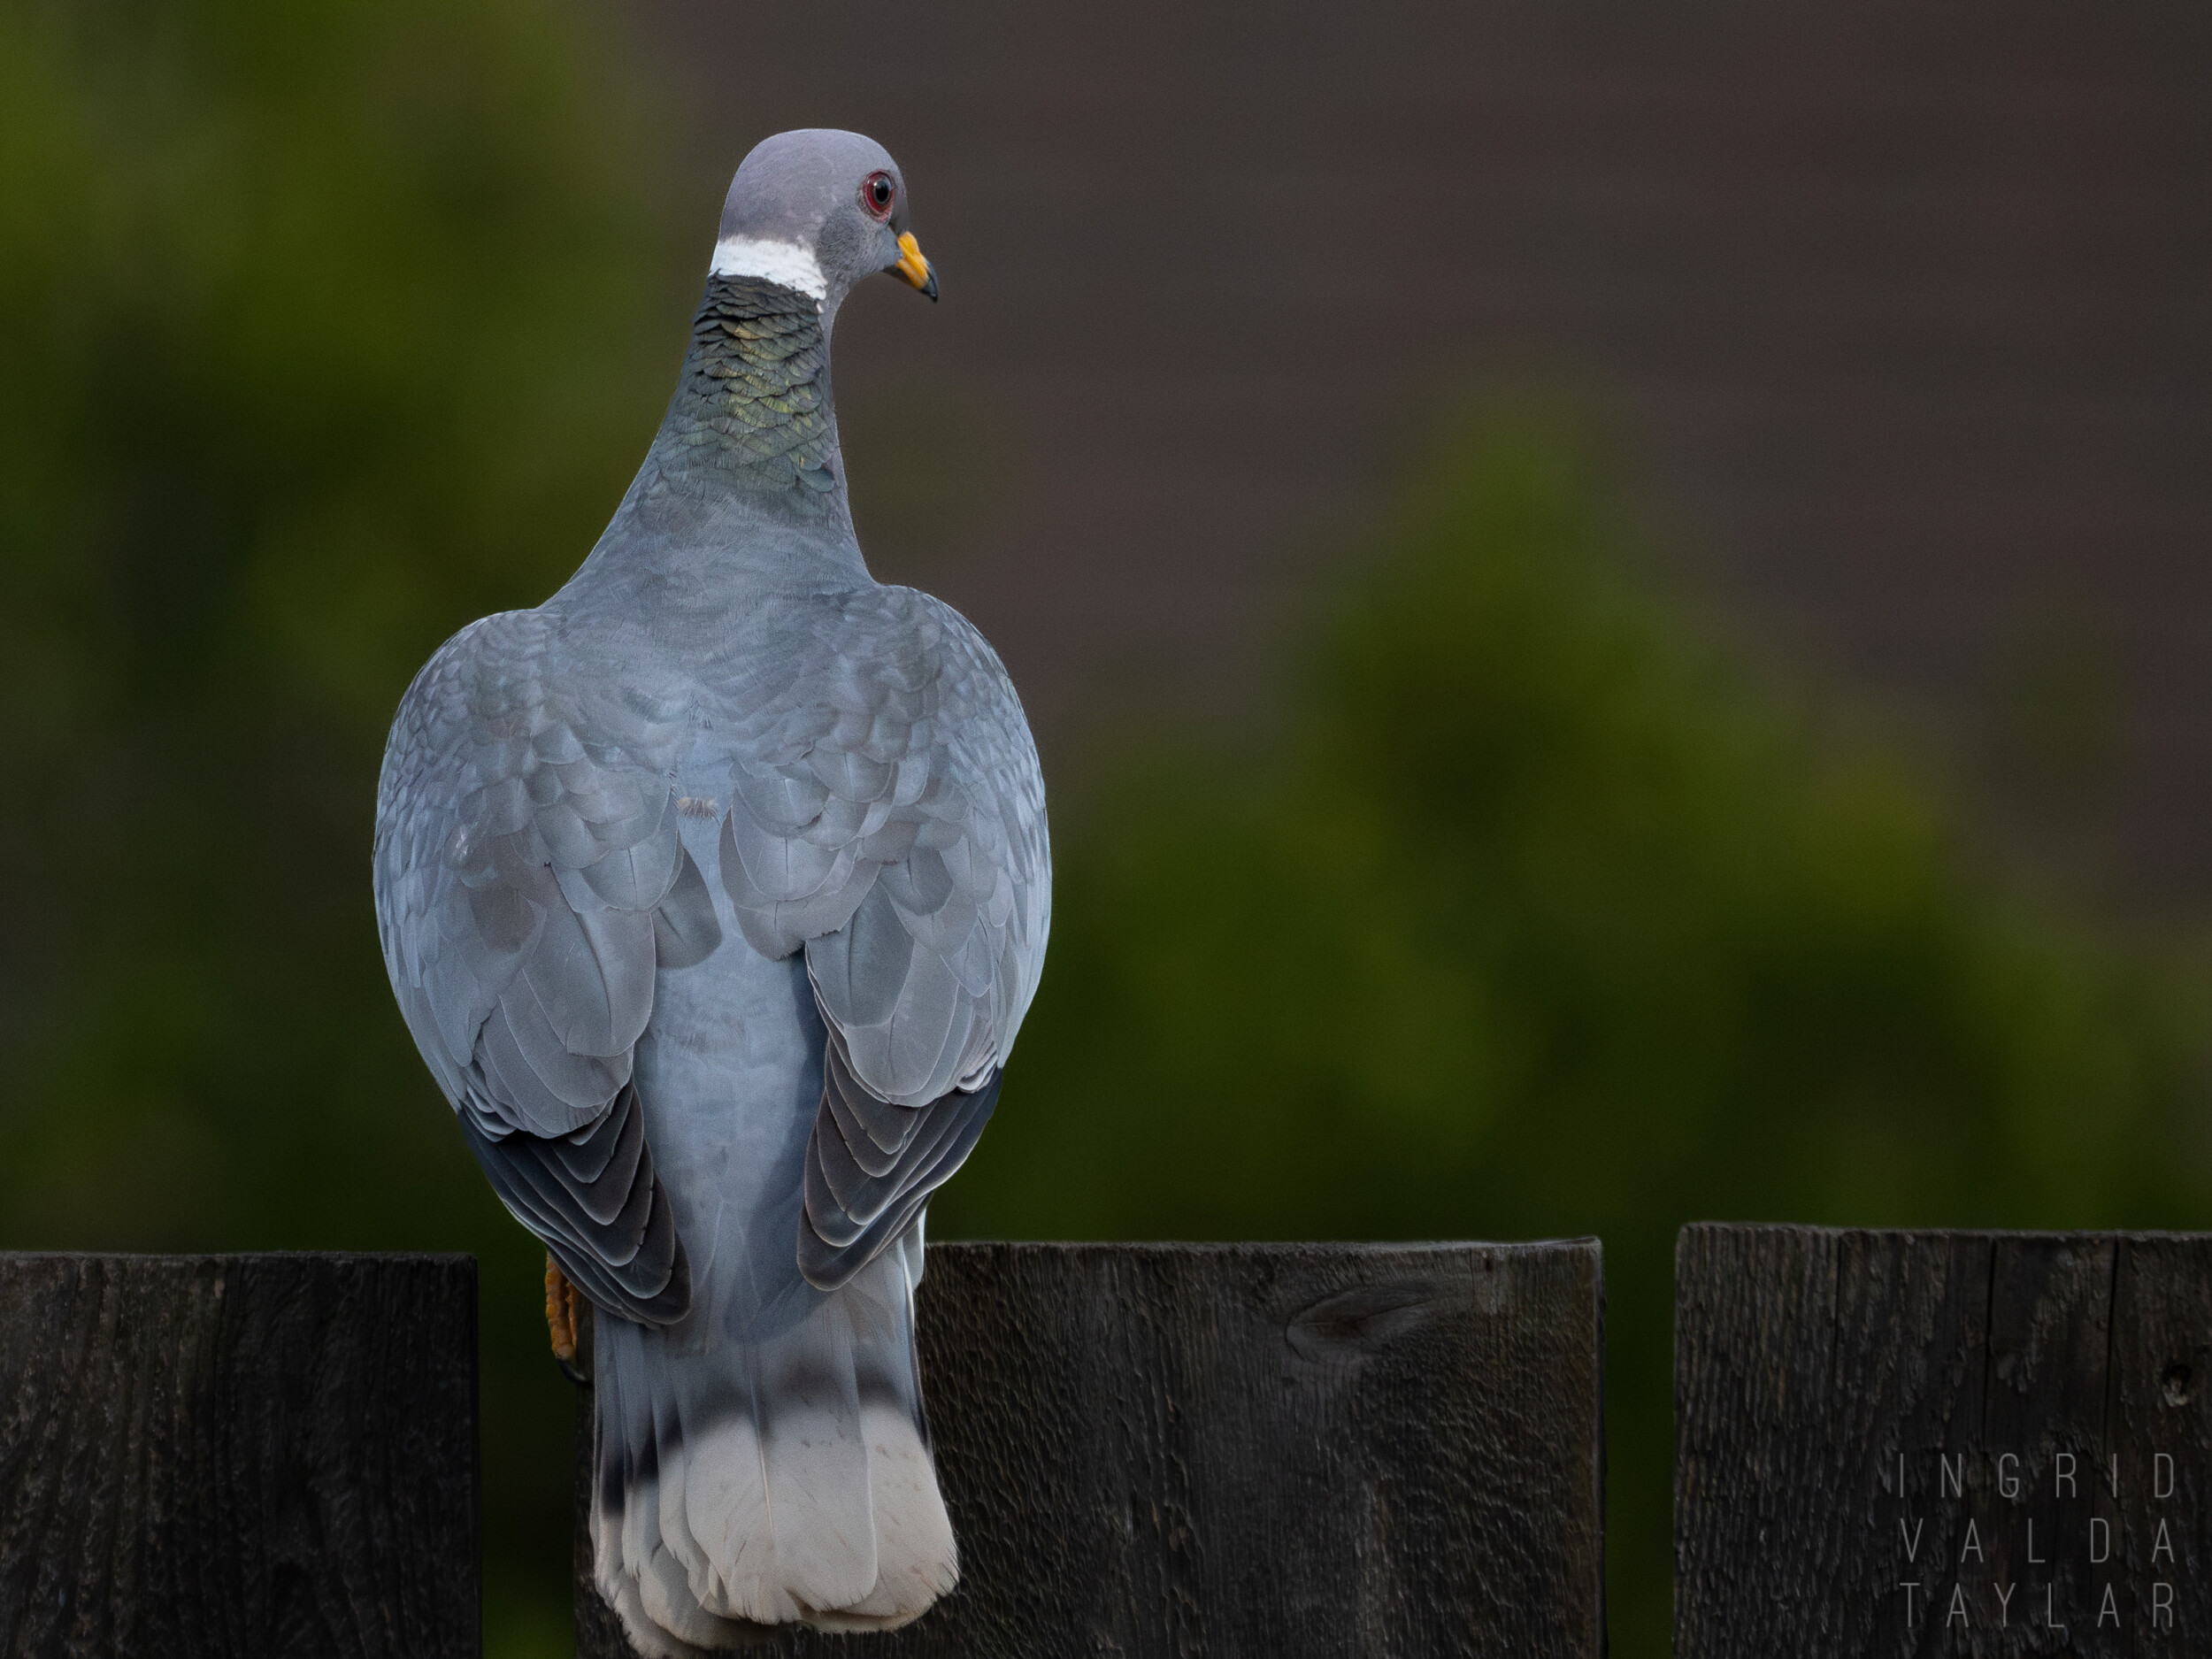 Band-Tailed Pigeon on Country Fence